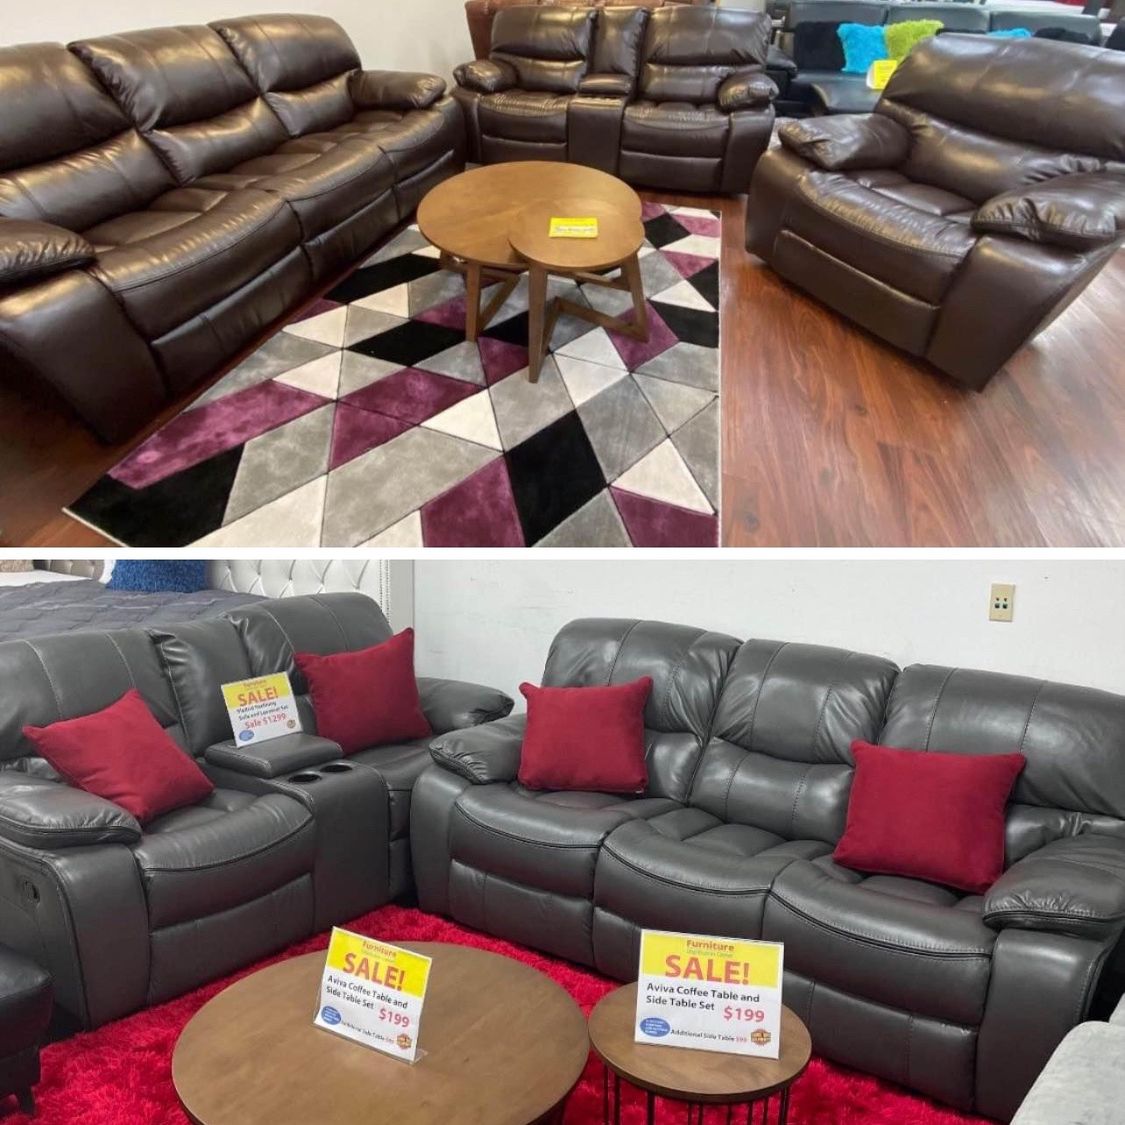 Spring Sale! Madrid, Leather Reclining Sofa And Loveseat In Brown Or Gray Only $899. Easy Finance Option. Same-Day Delivery.